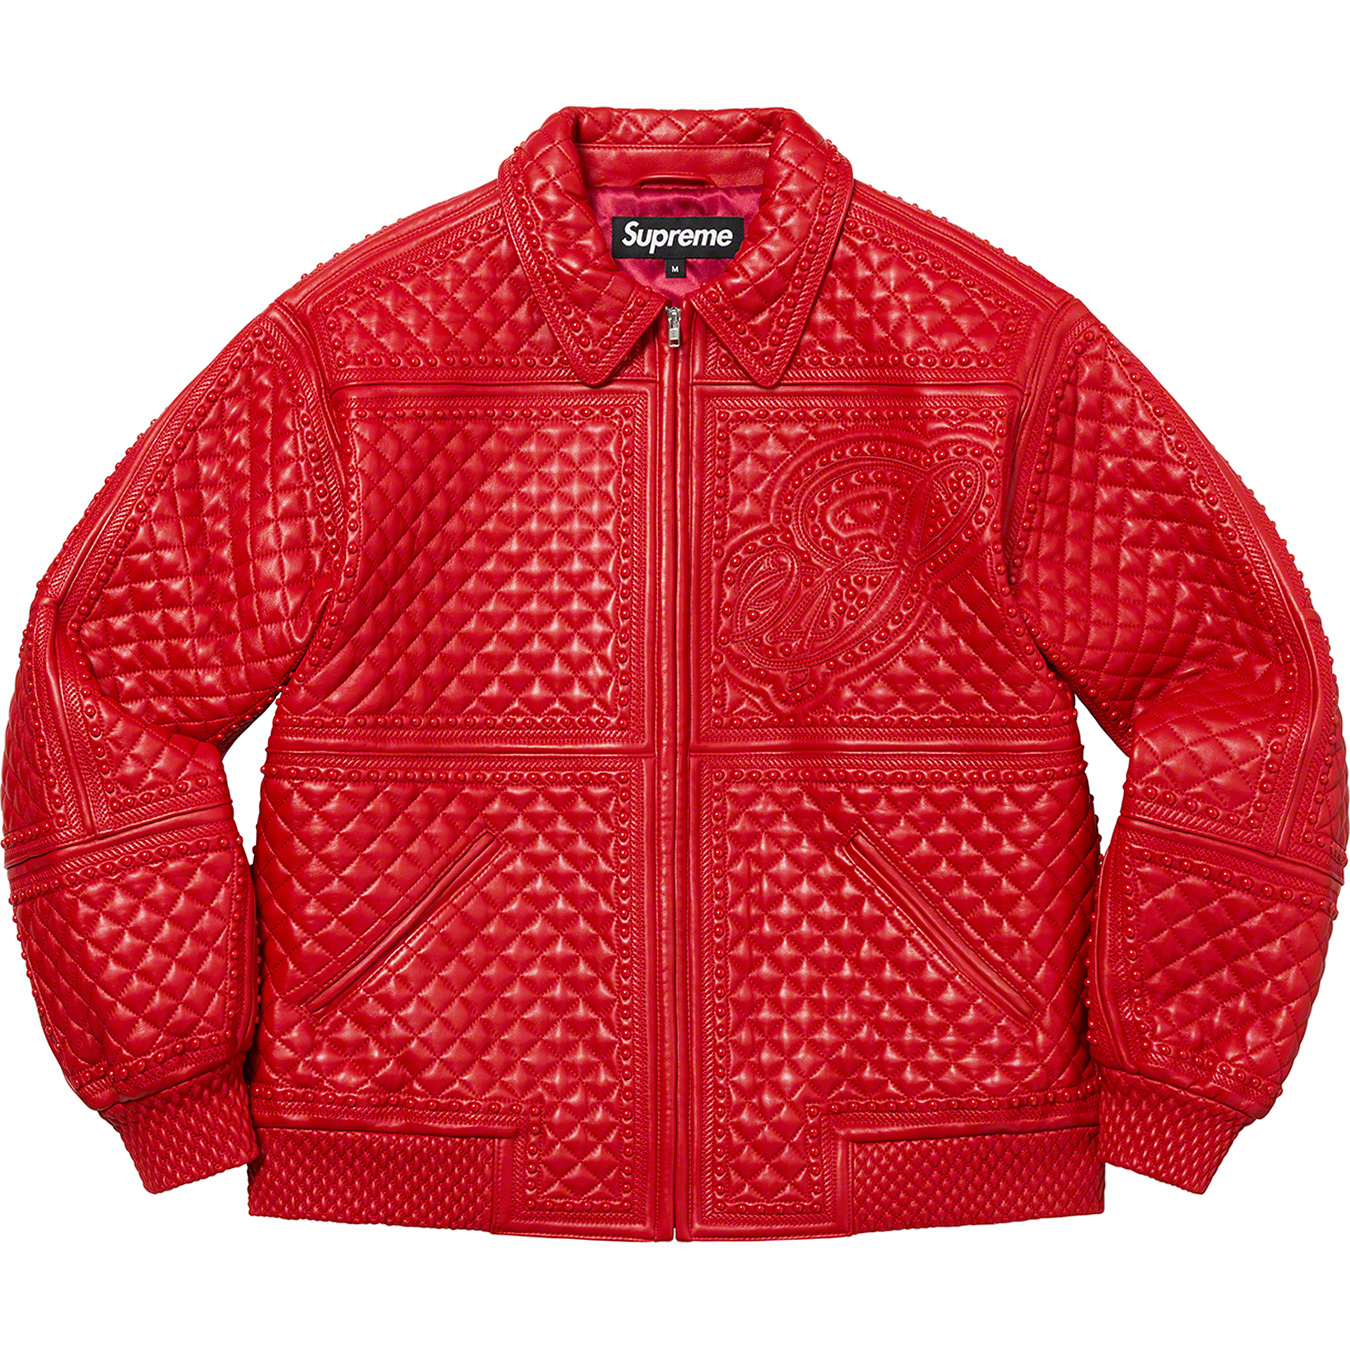 Supreme Studded Quilted Leather Jacket